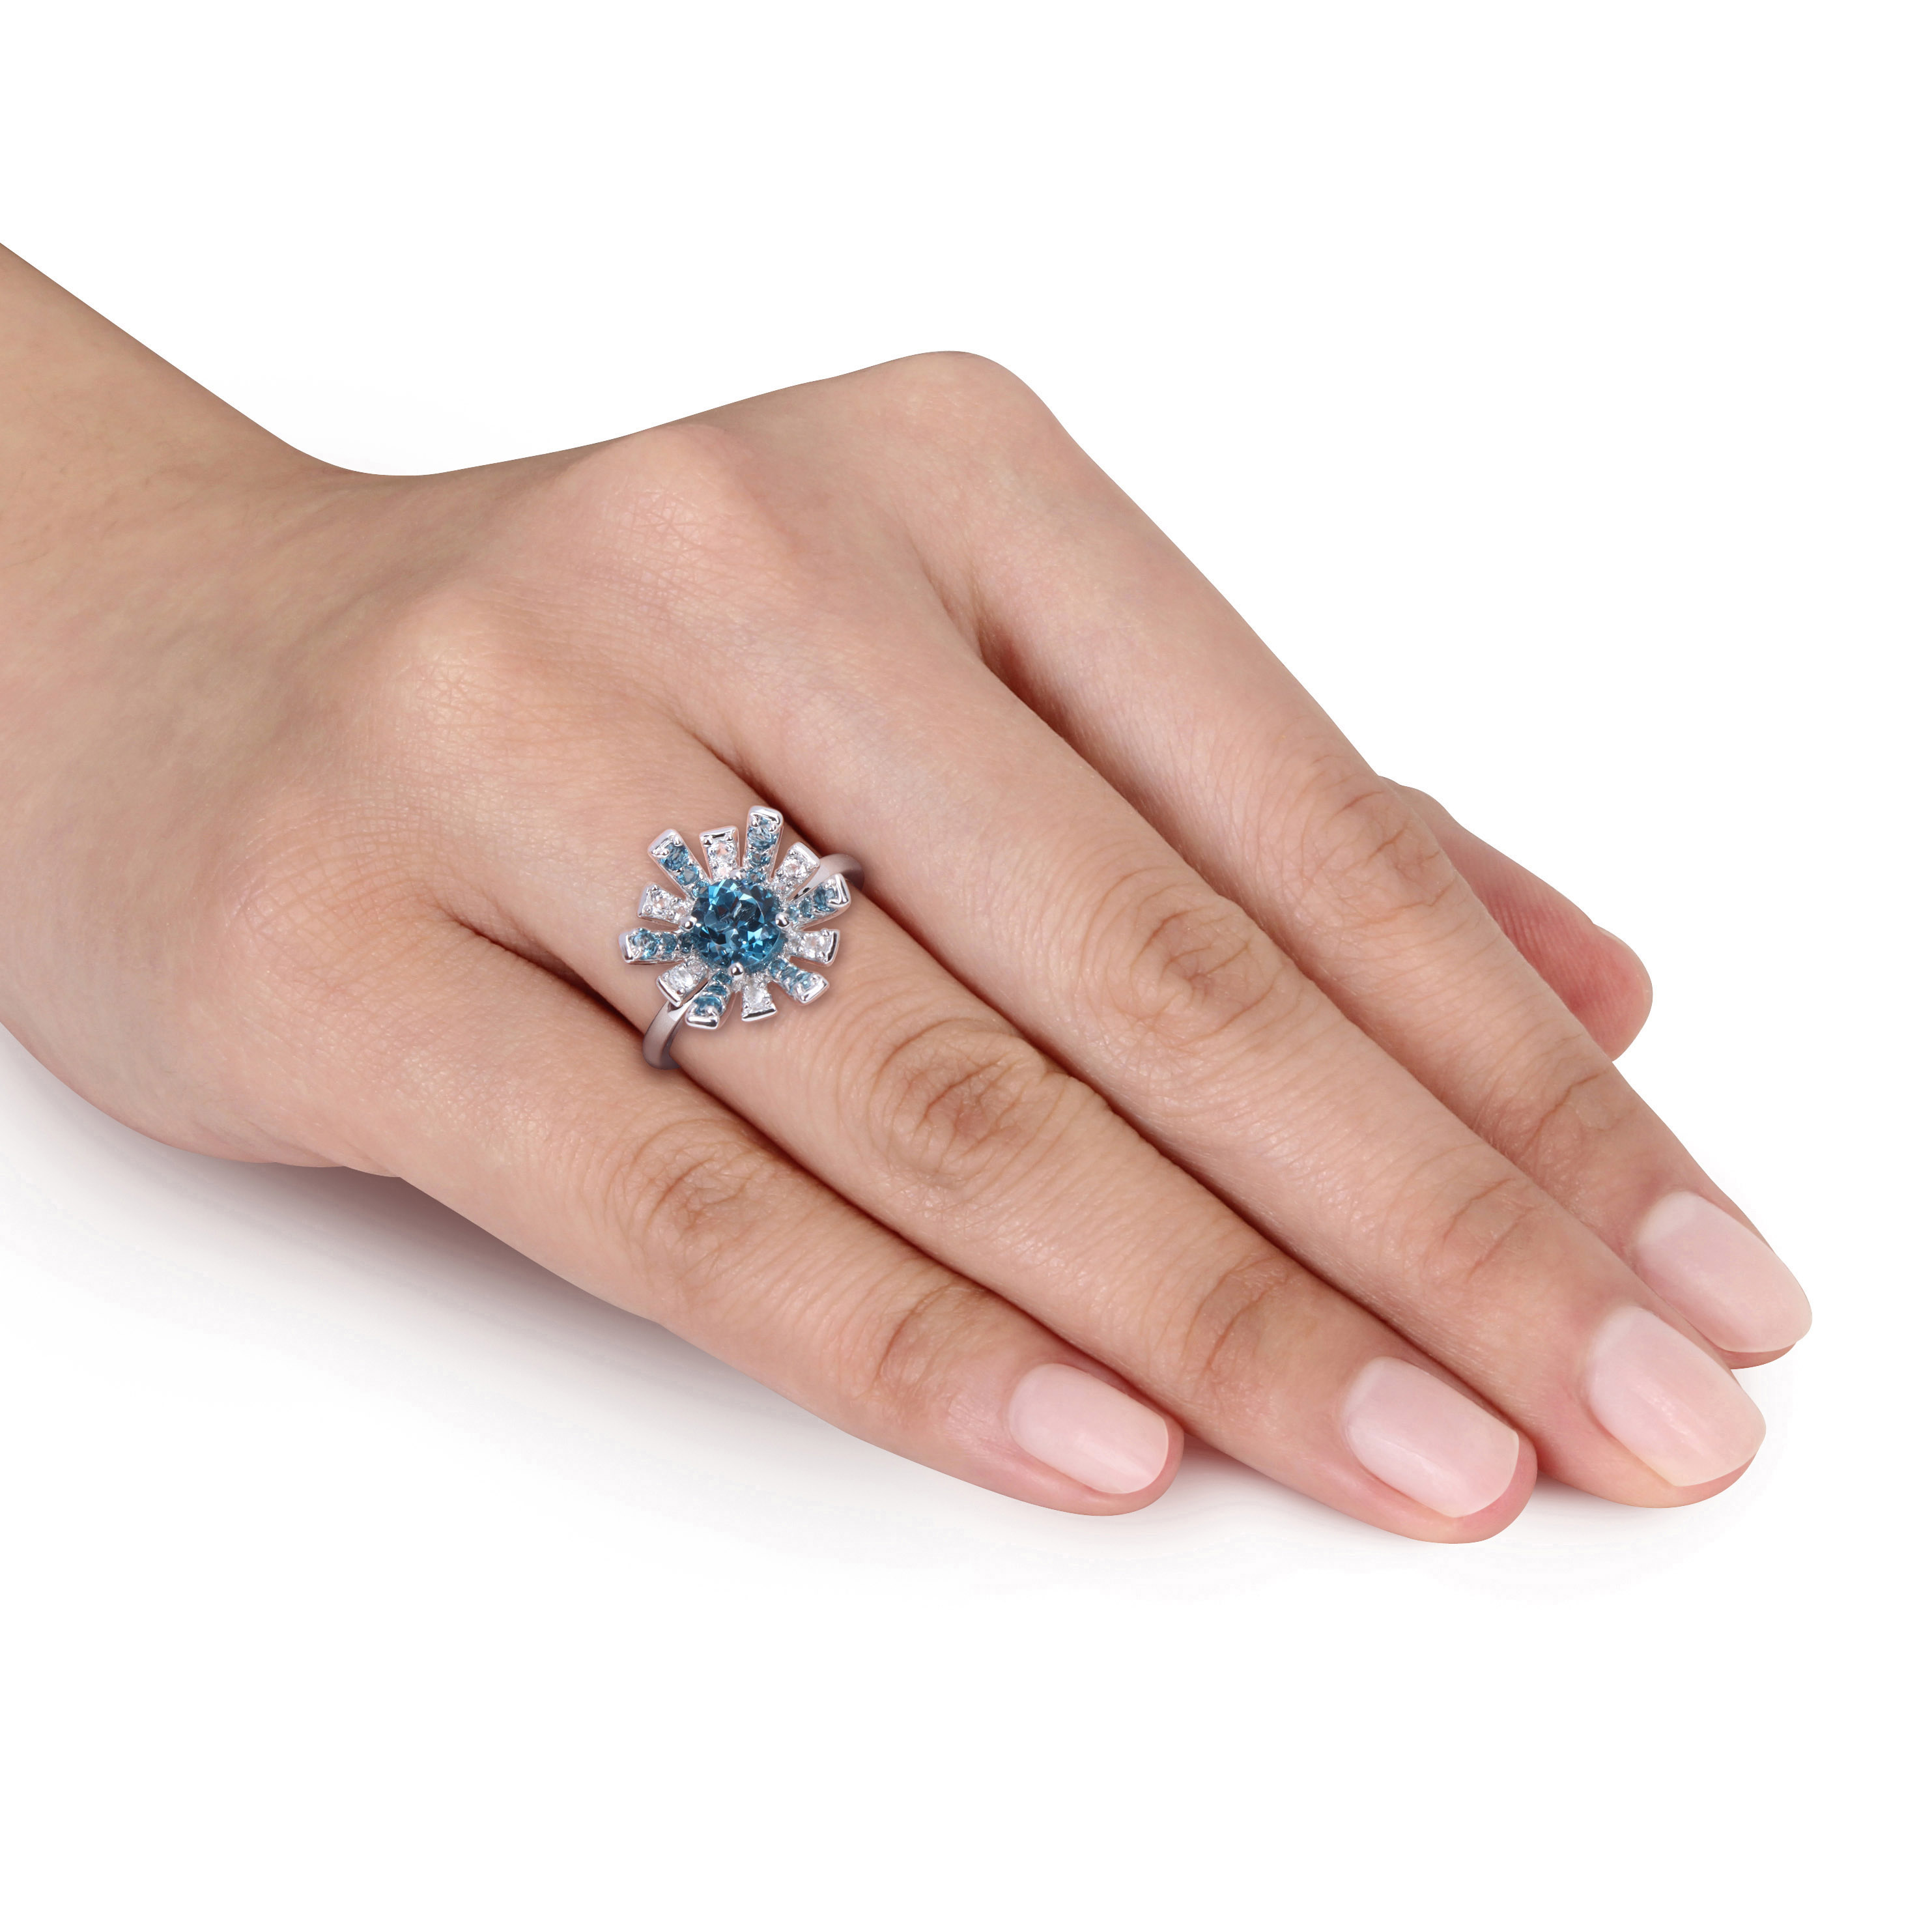 1 3/4 CT TGW London Blue Topaz and White Topaz Starburst Cocktail Ring in Sterling Silver